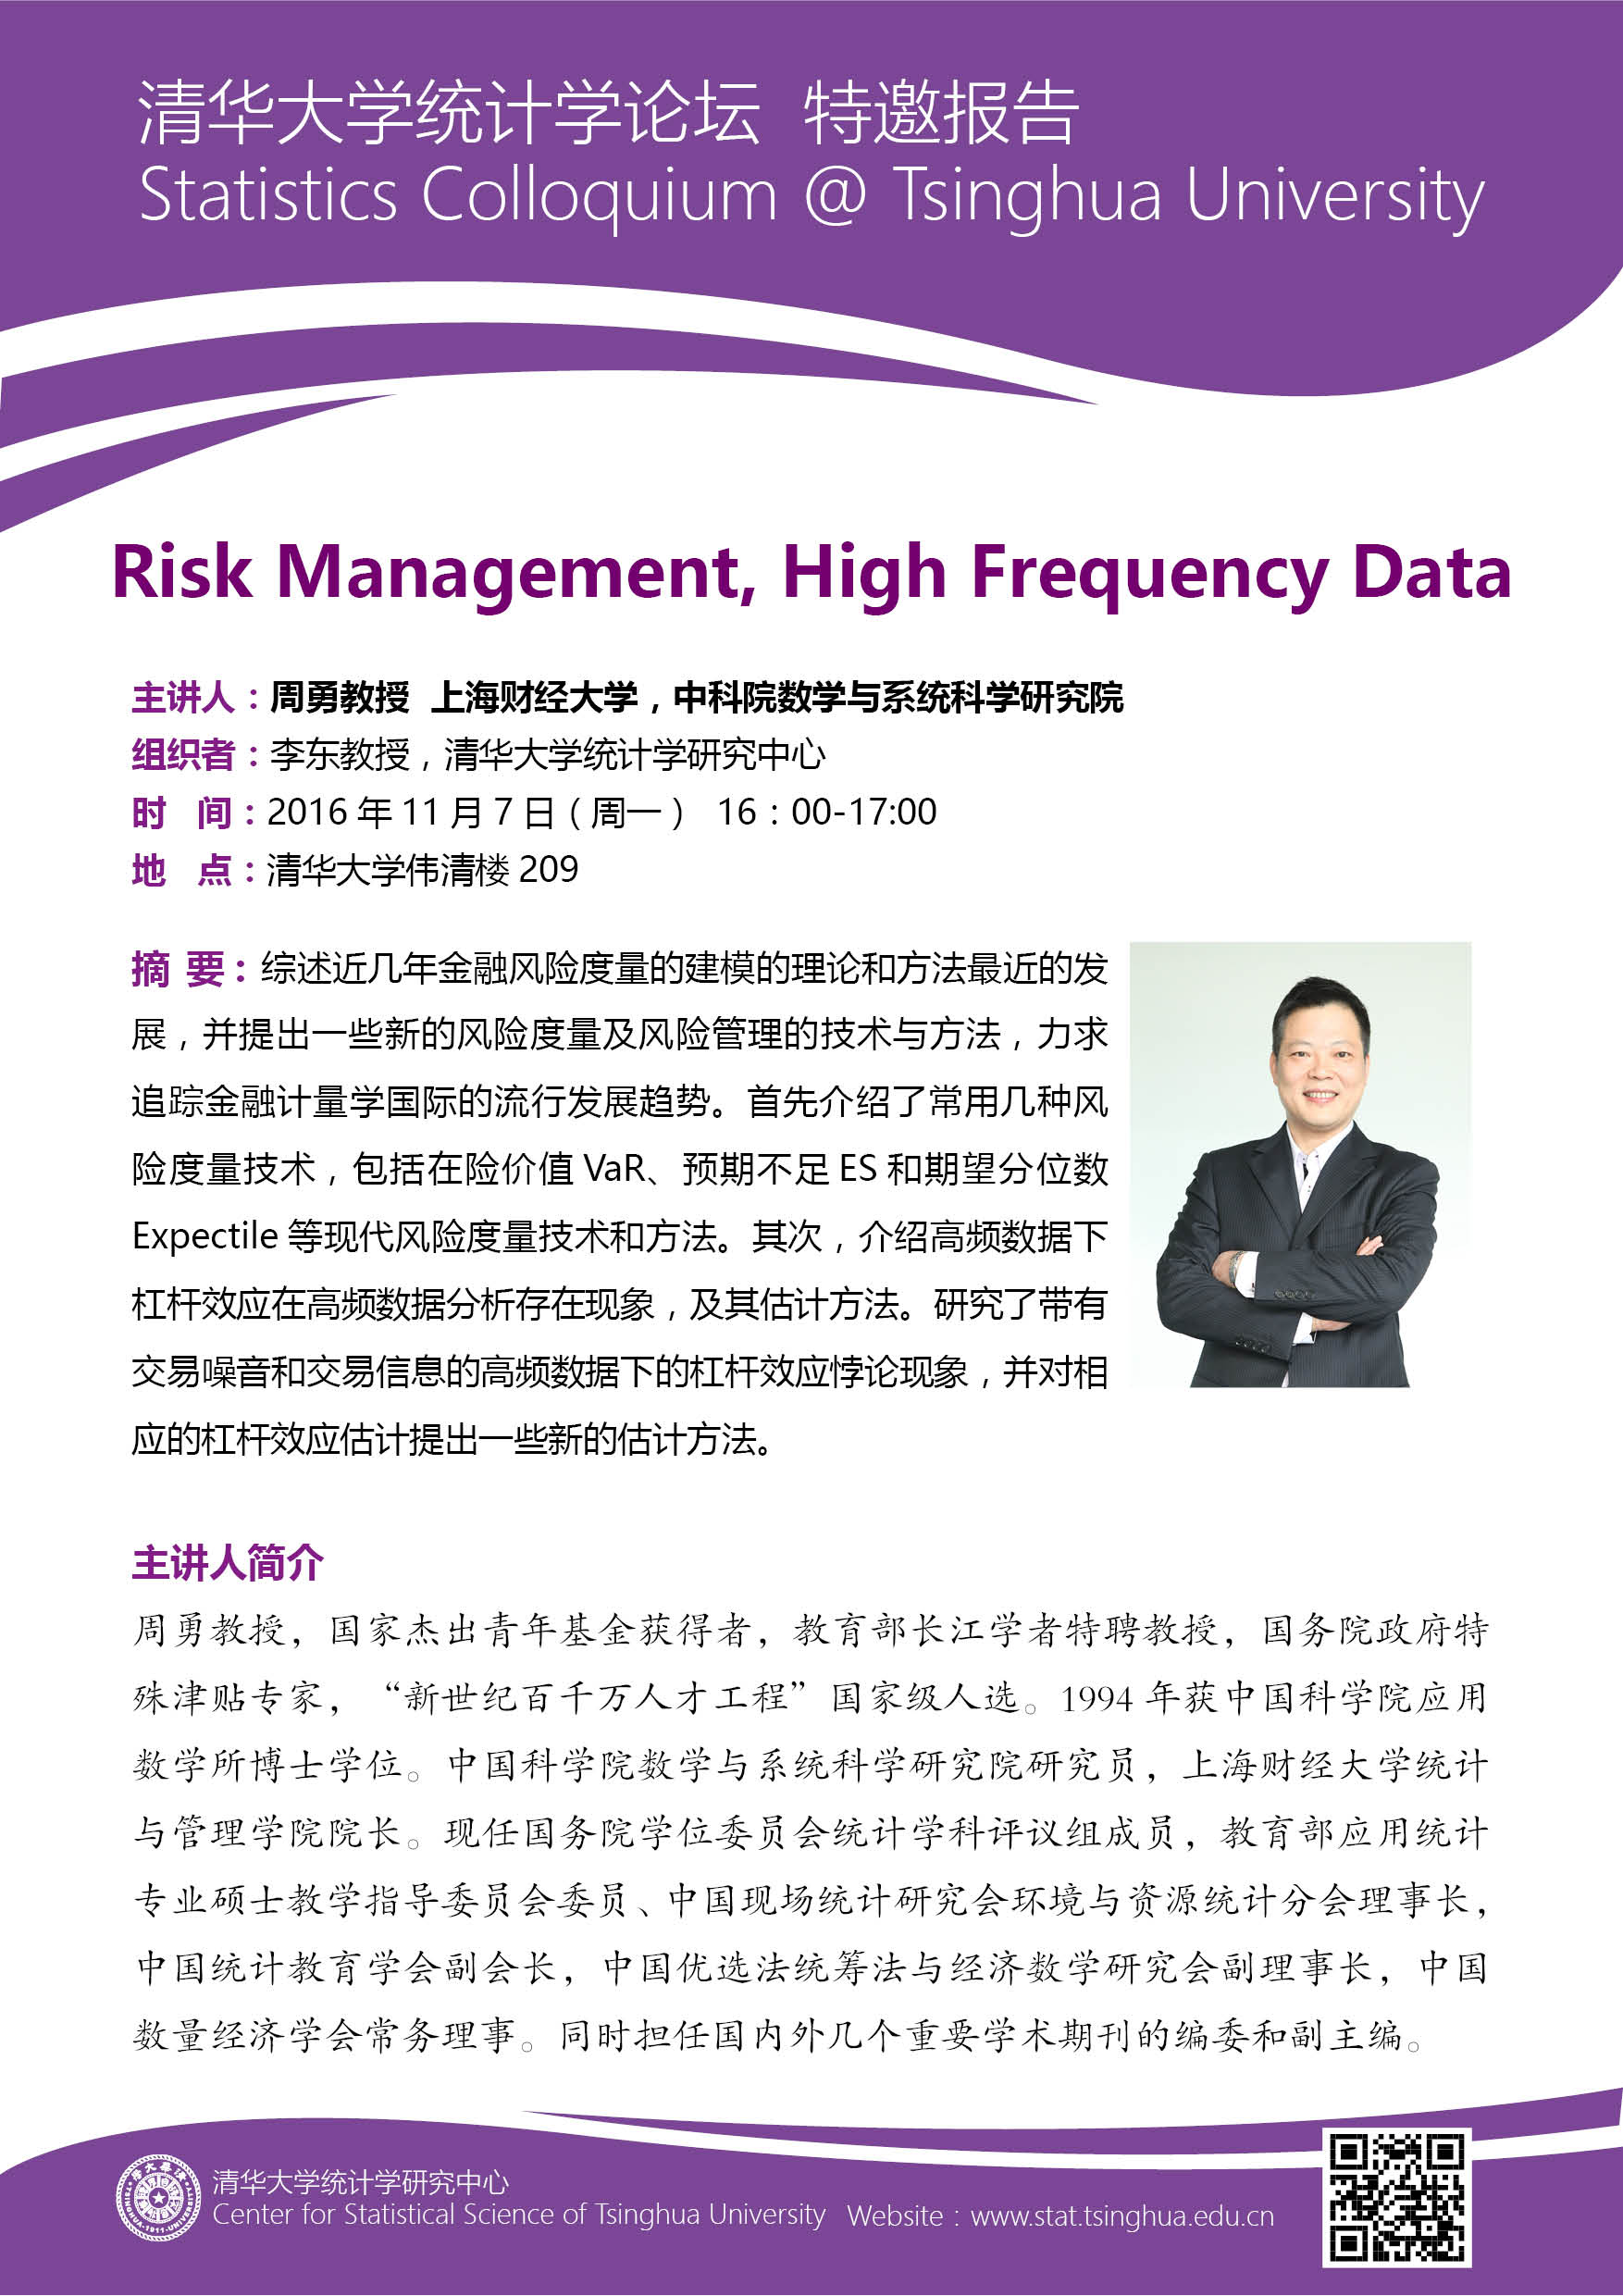 Risk Management, High Frequency Data